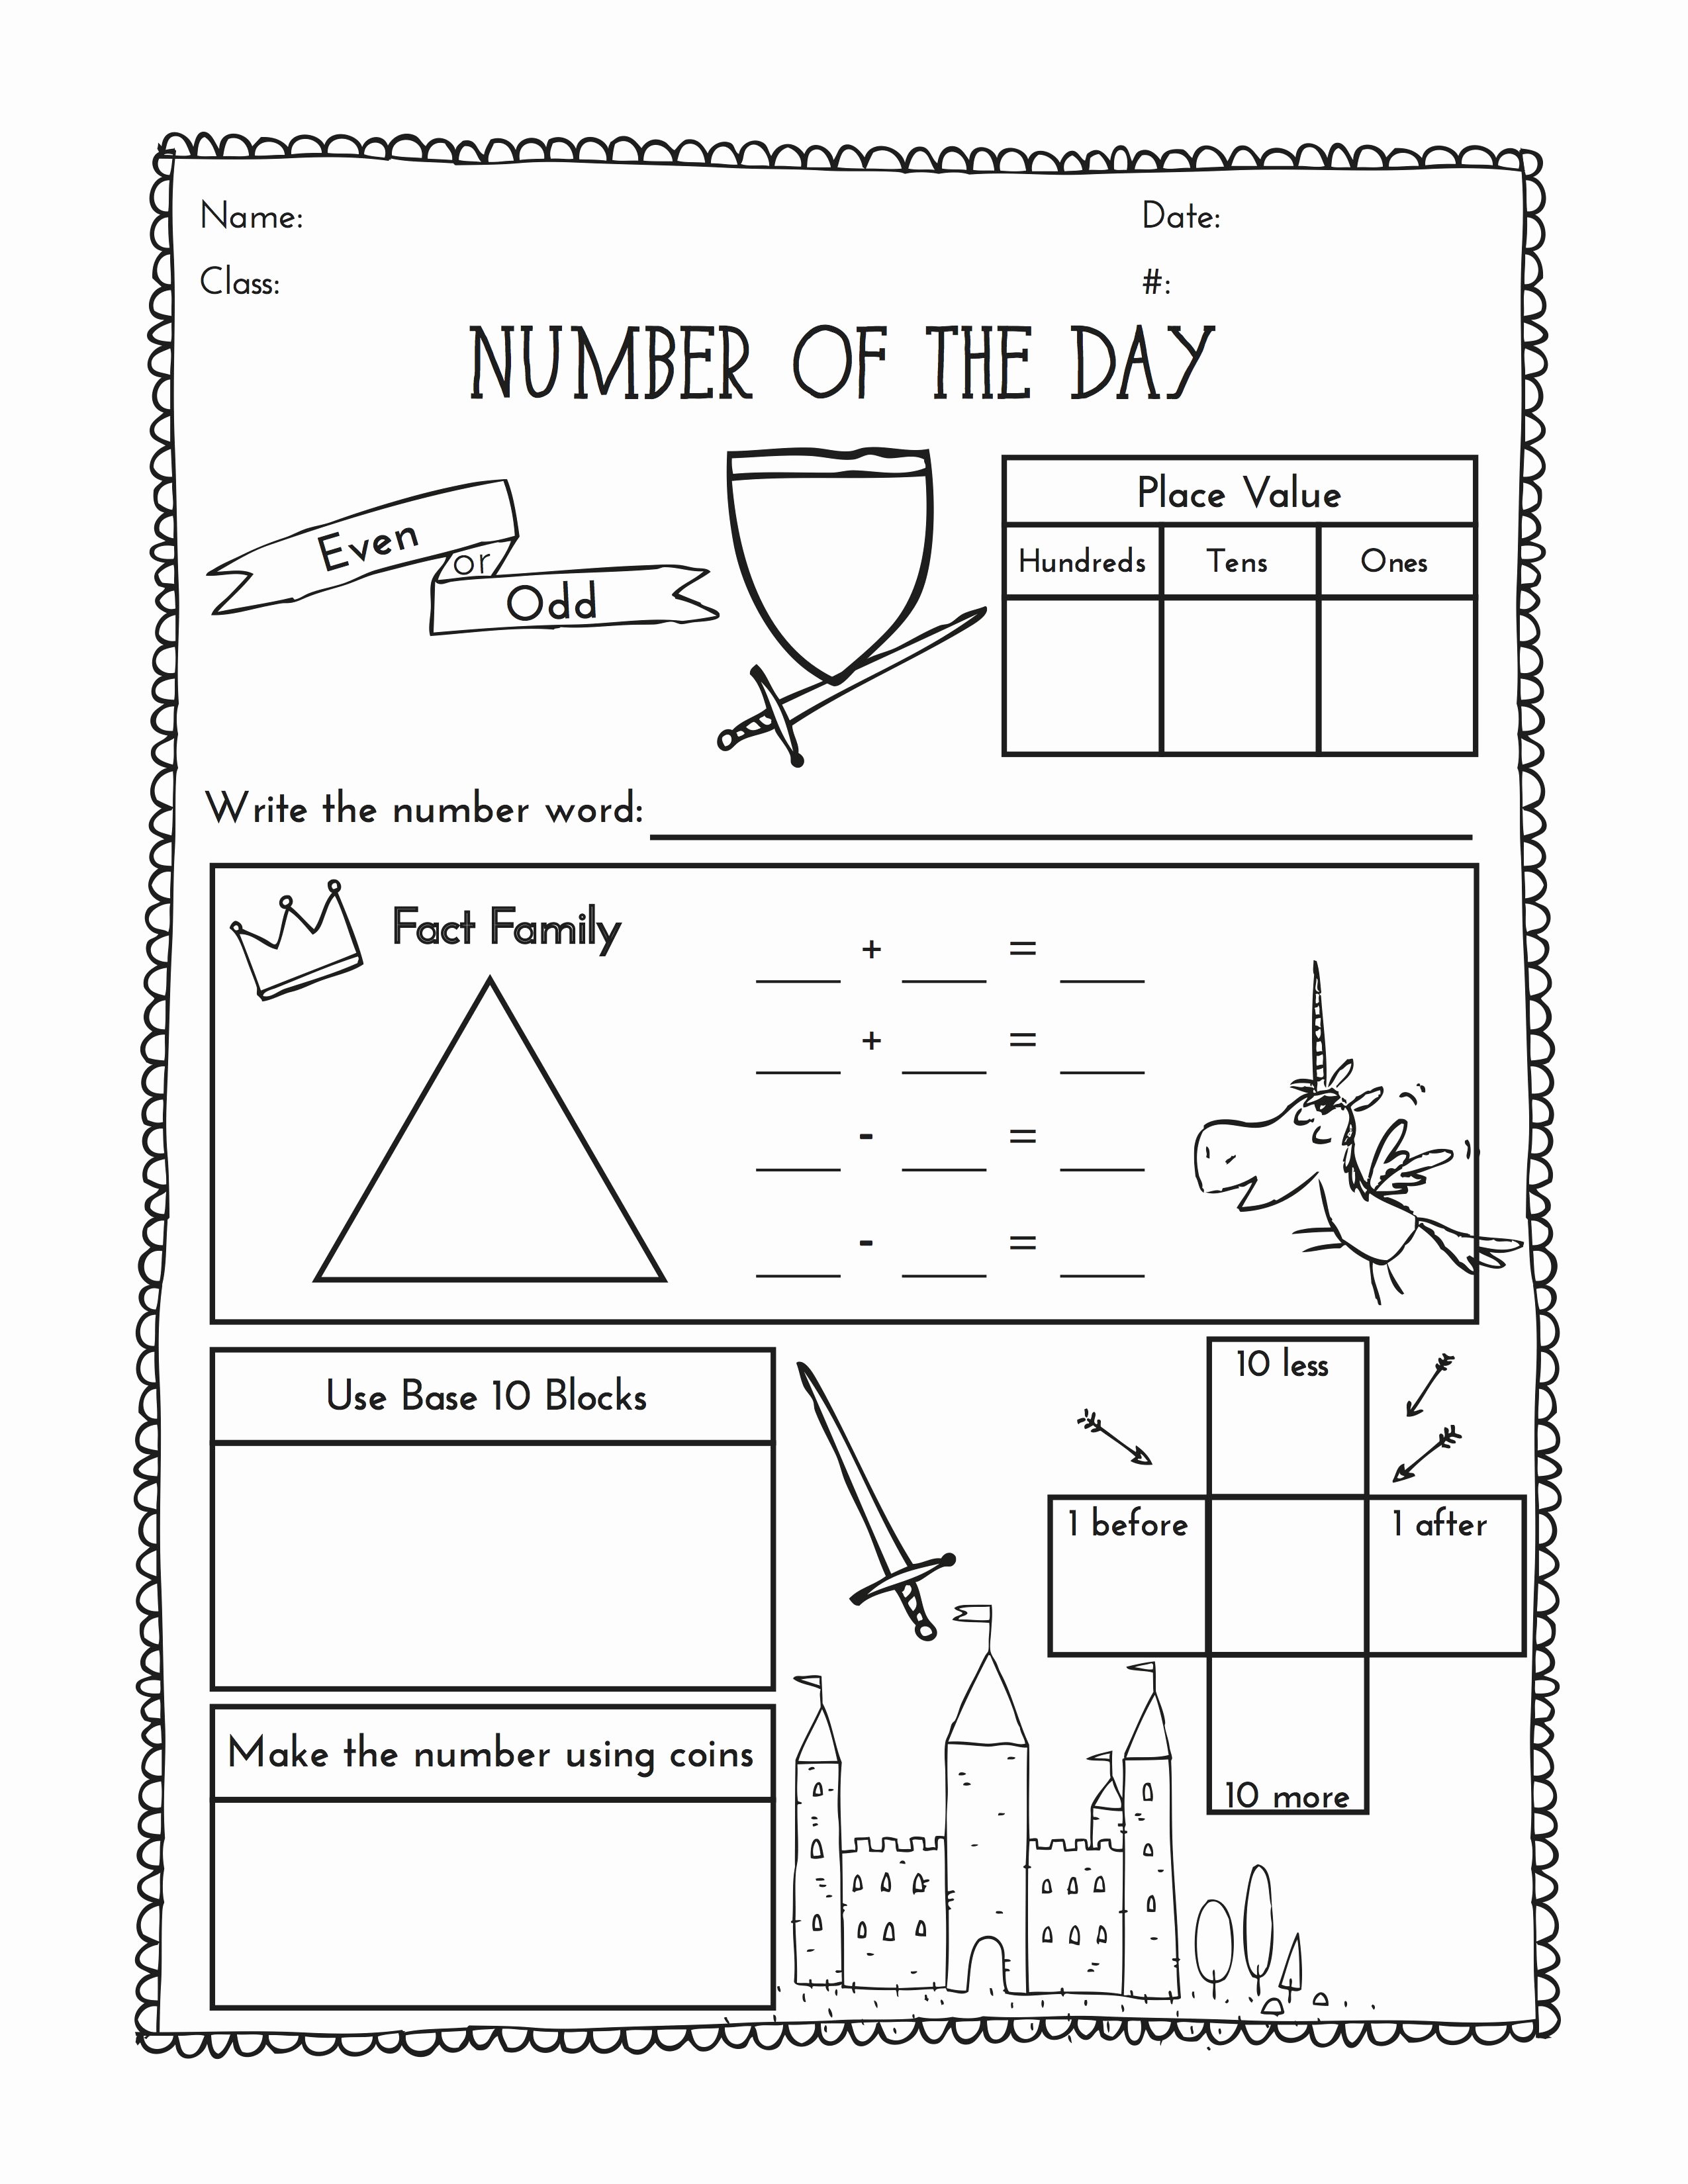 Number Of the Day Worksheet Best Of Second Grade Number Of the Day Worksheet